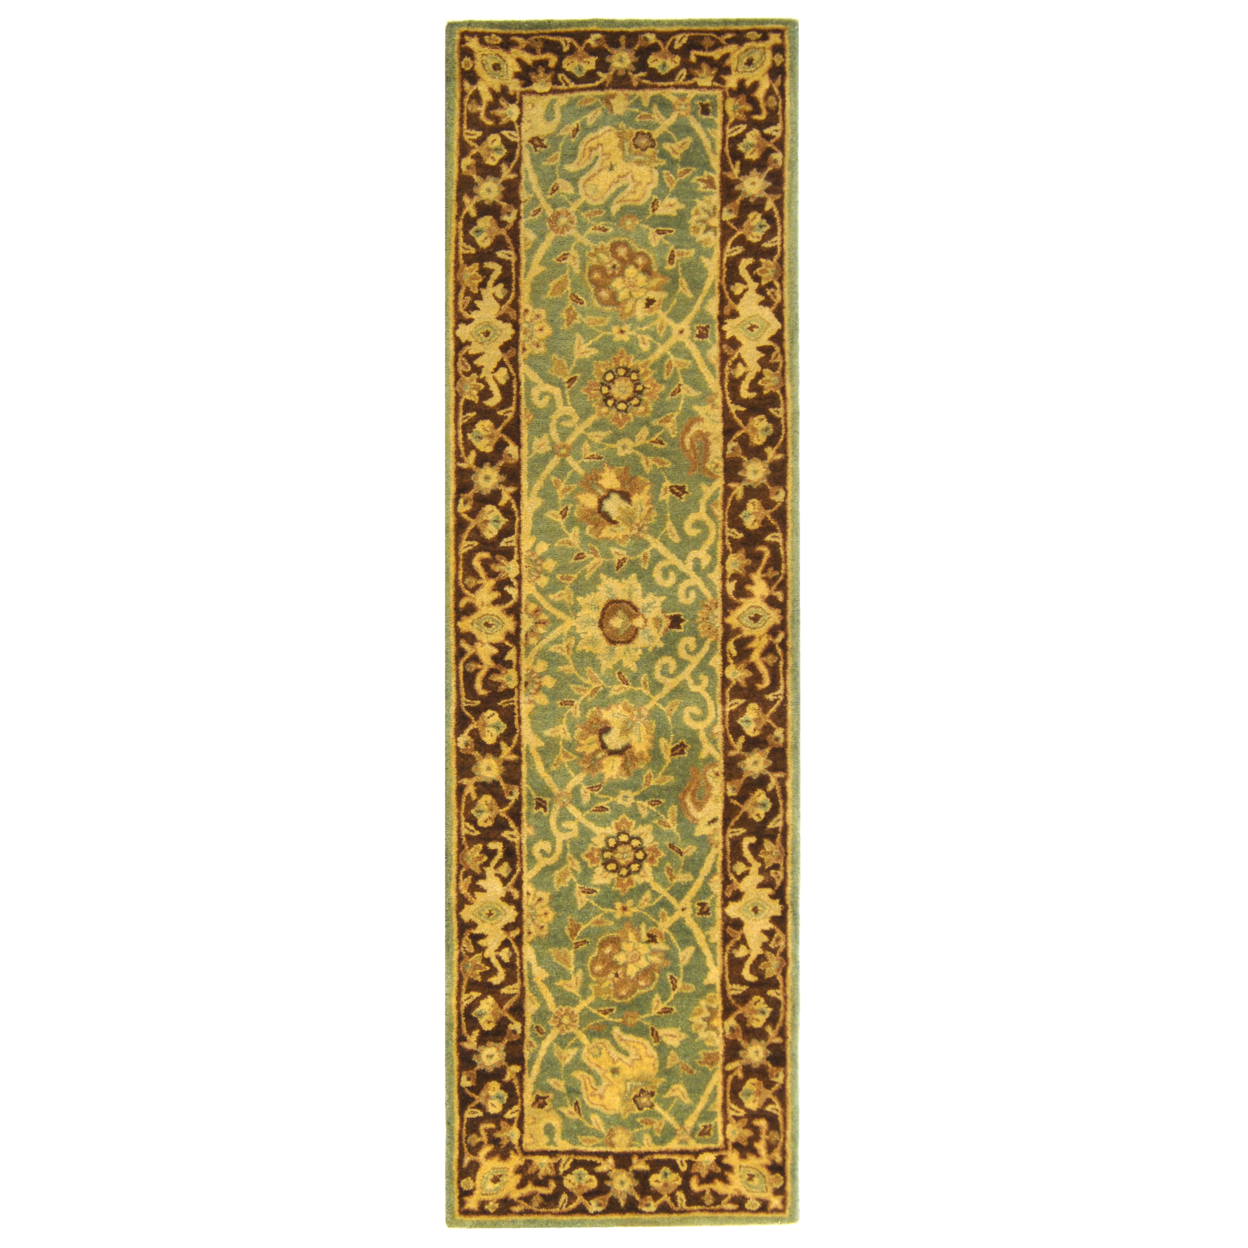 SAFAVIEH Antiquity Lilibeth Traditional Floral Wool Runner Rug, Green/Brown, 2'3" x 8' - image 1 of 8